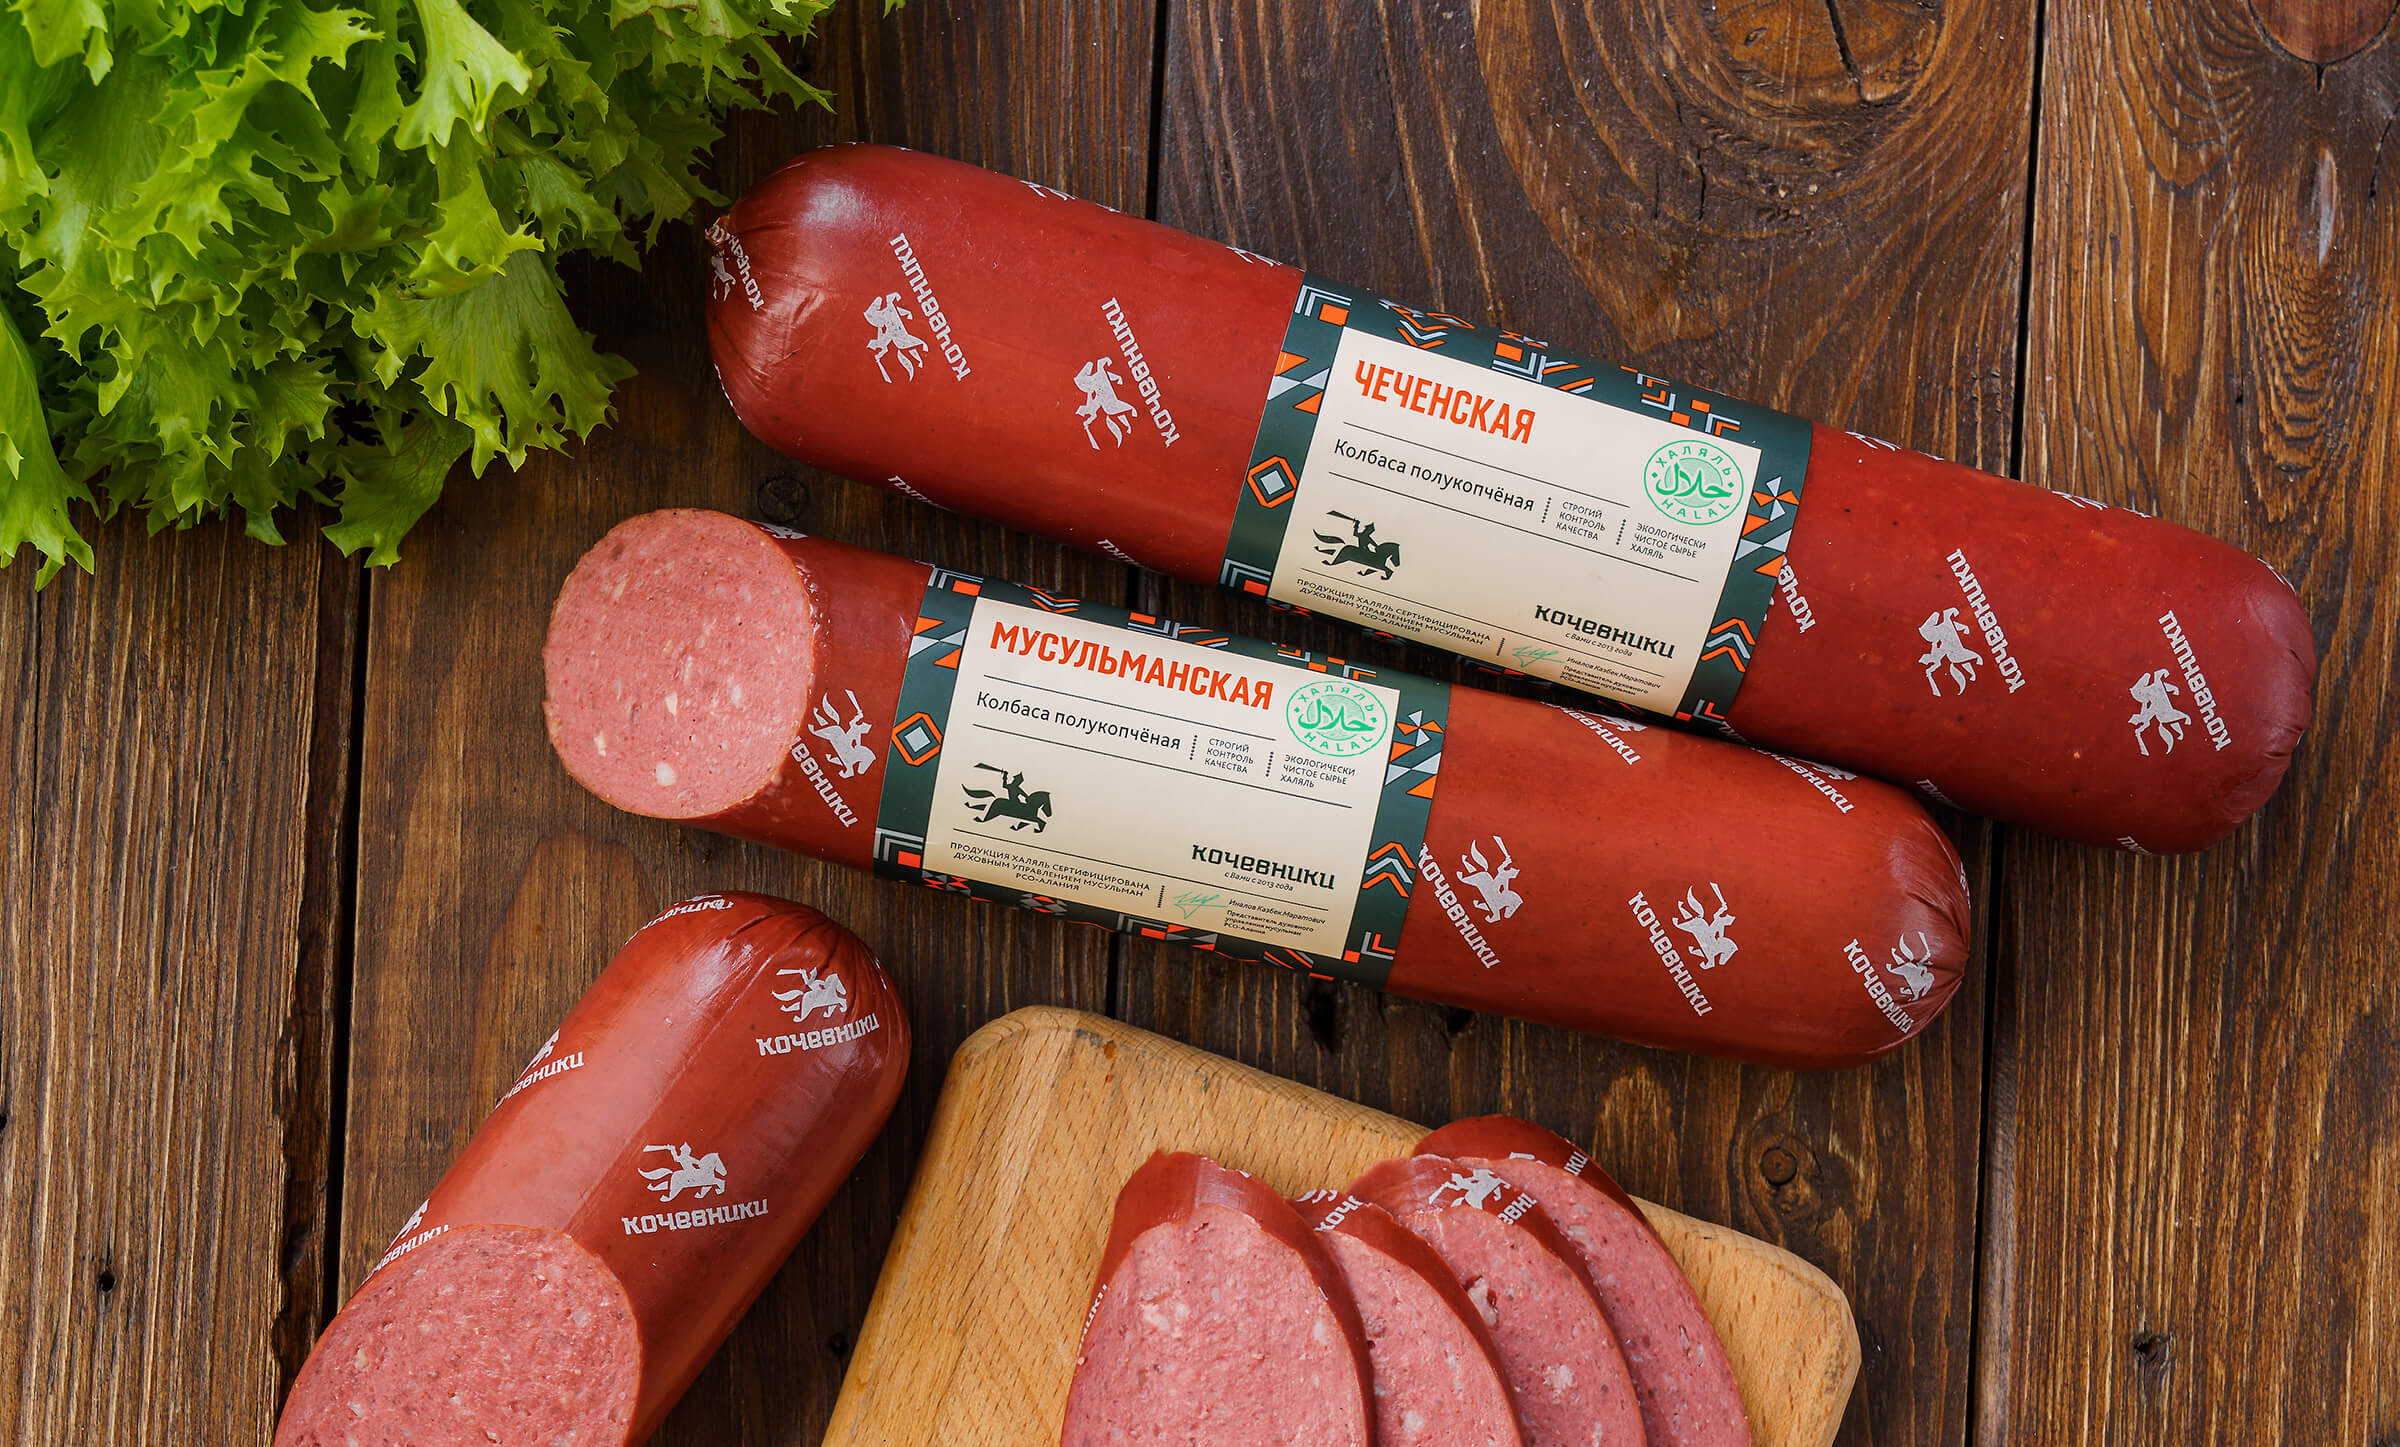 Uniqorn Redesign of Kochevnikis Sausage Brand and Packaging Label